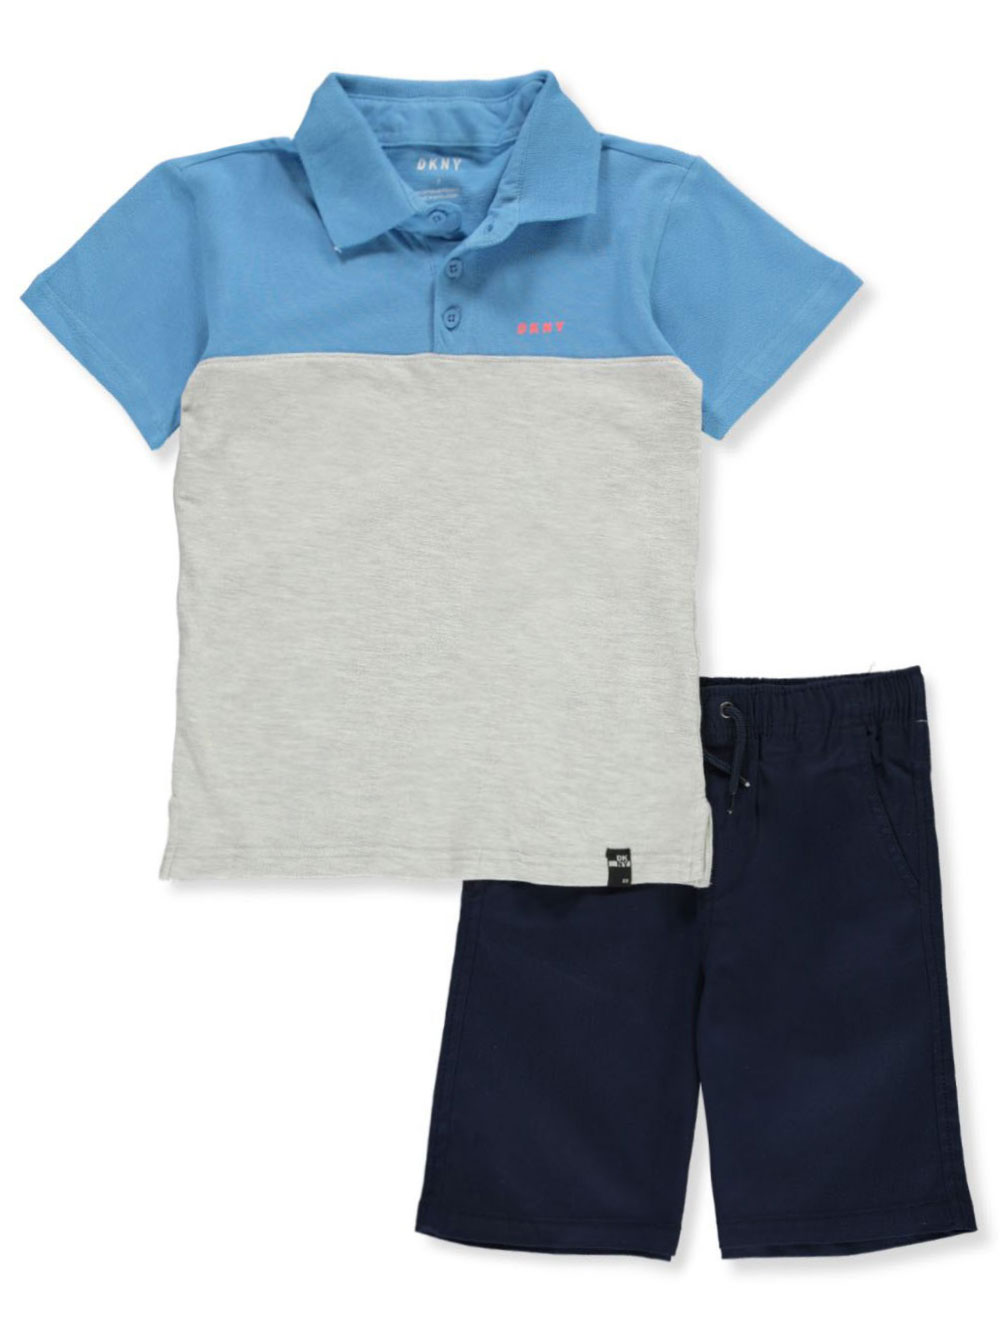 Size 5-6 Sets for Boys